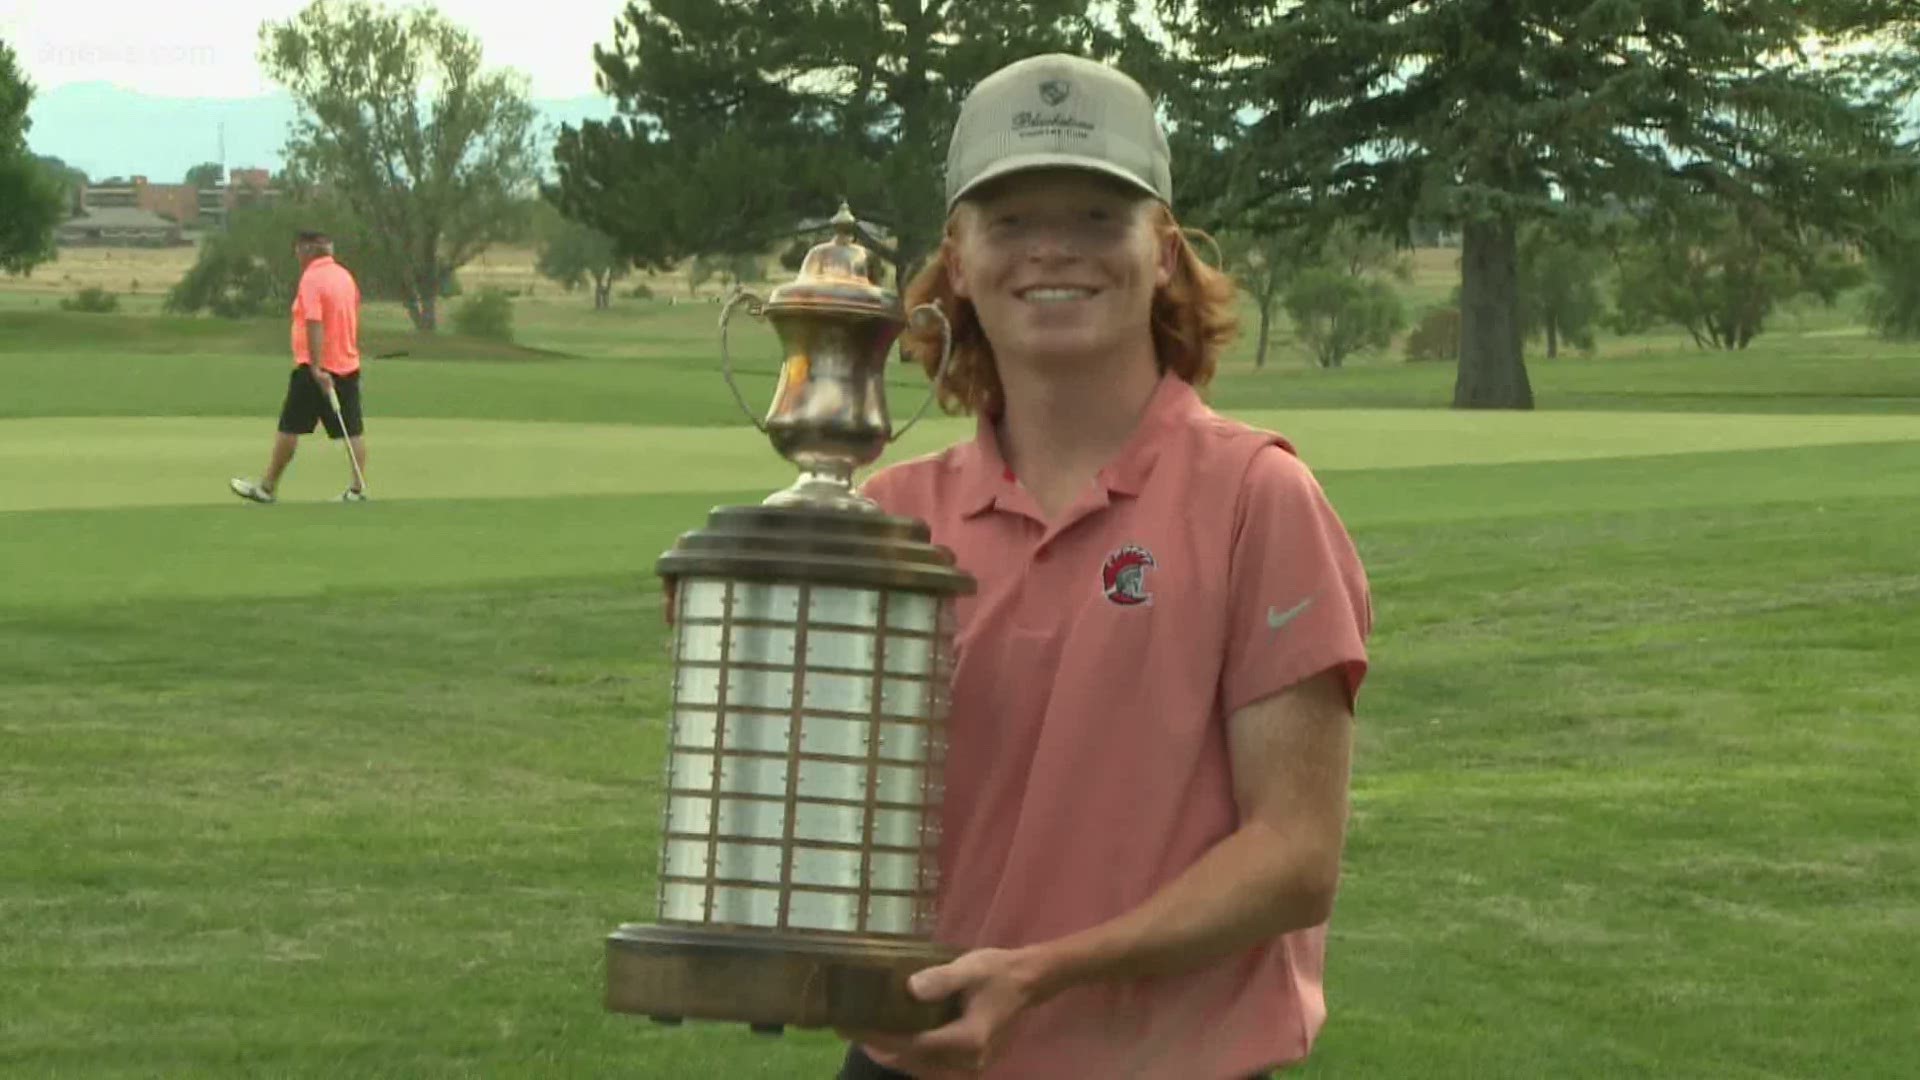 Charlotte Hillary and Bo Wardynski captured the junior major title at Commonground Golf Course on Wednesday.